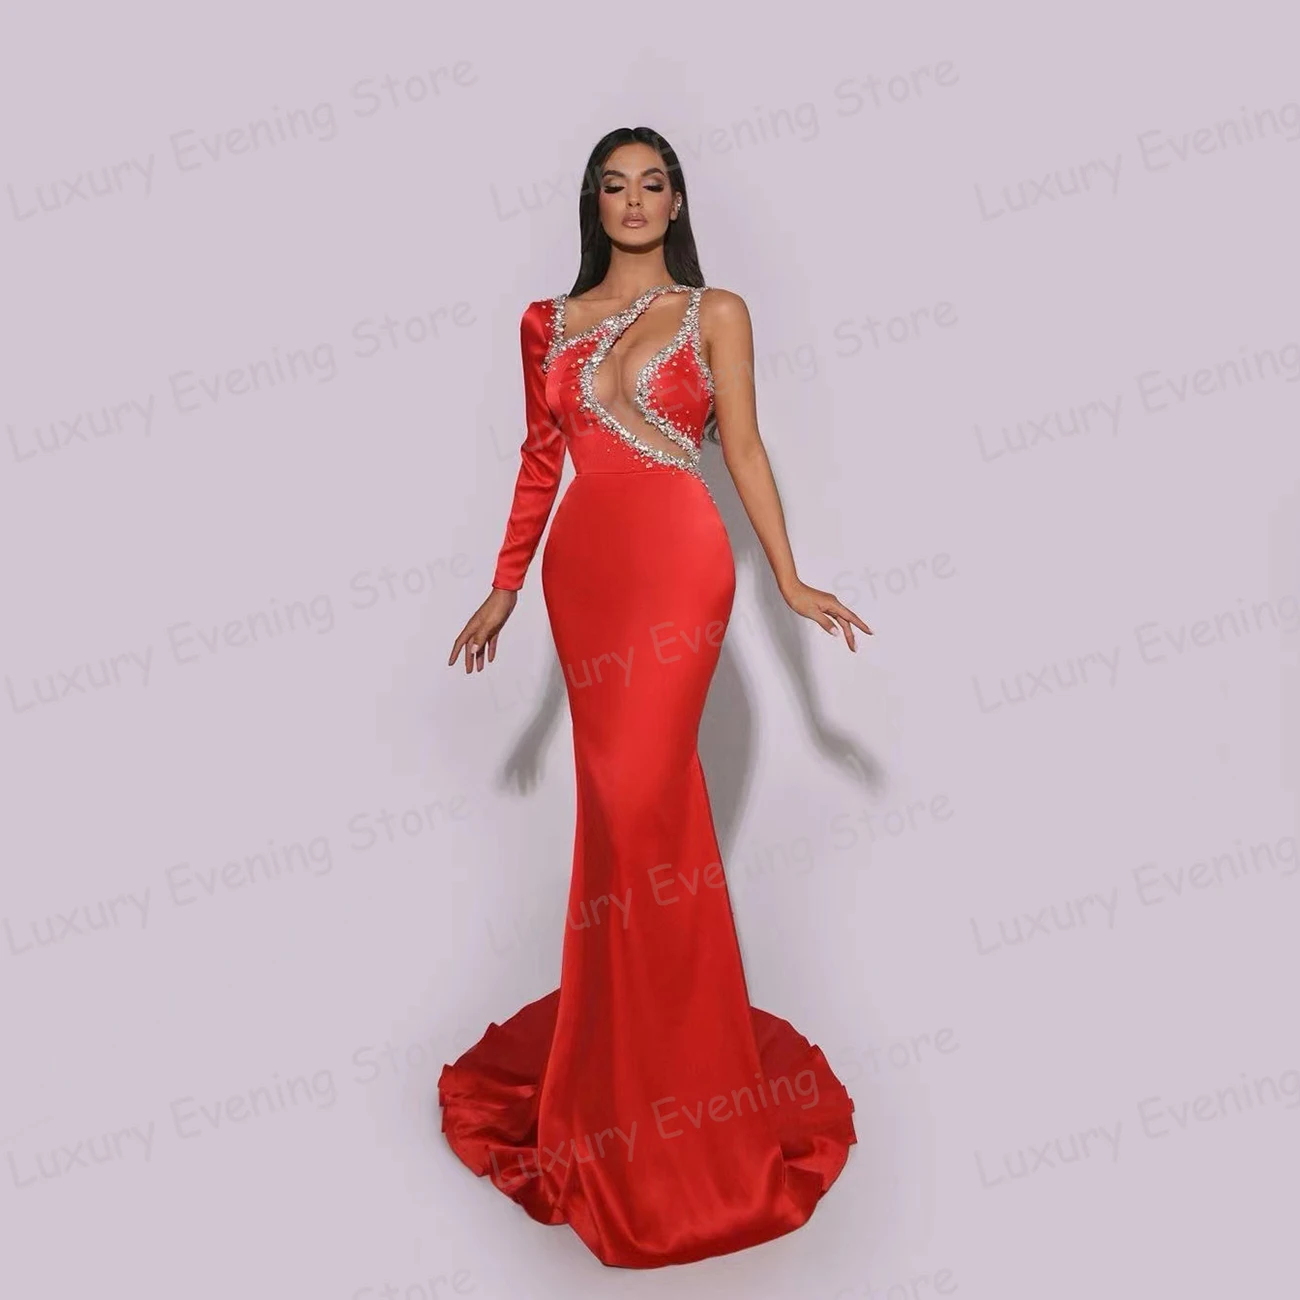 

Celebrity Hollow Red Evening Dresses Sequined Mermaid Prom Gowns Women's One Shoulder Count Train Fashion Party Vestidos Novia